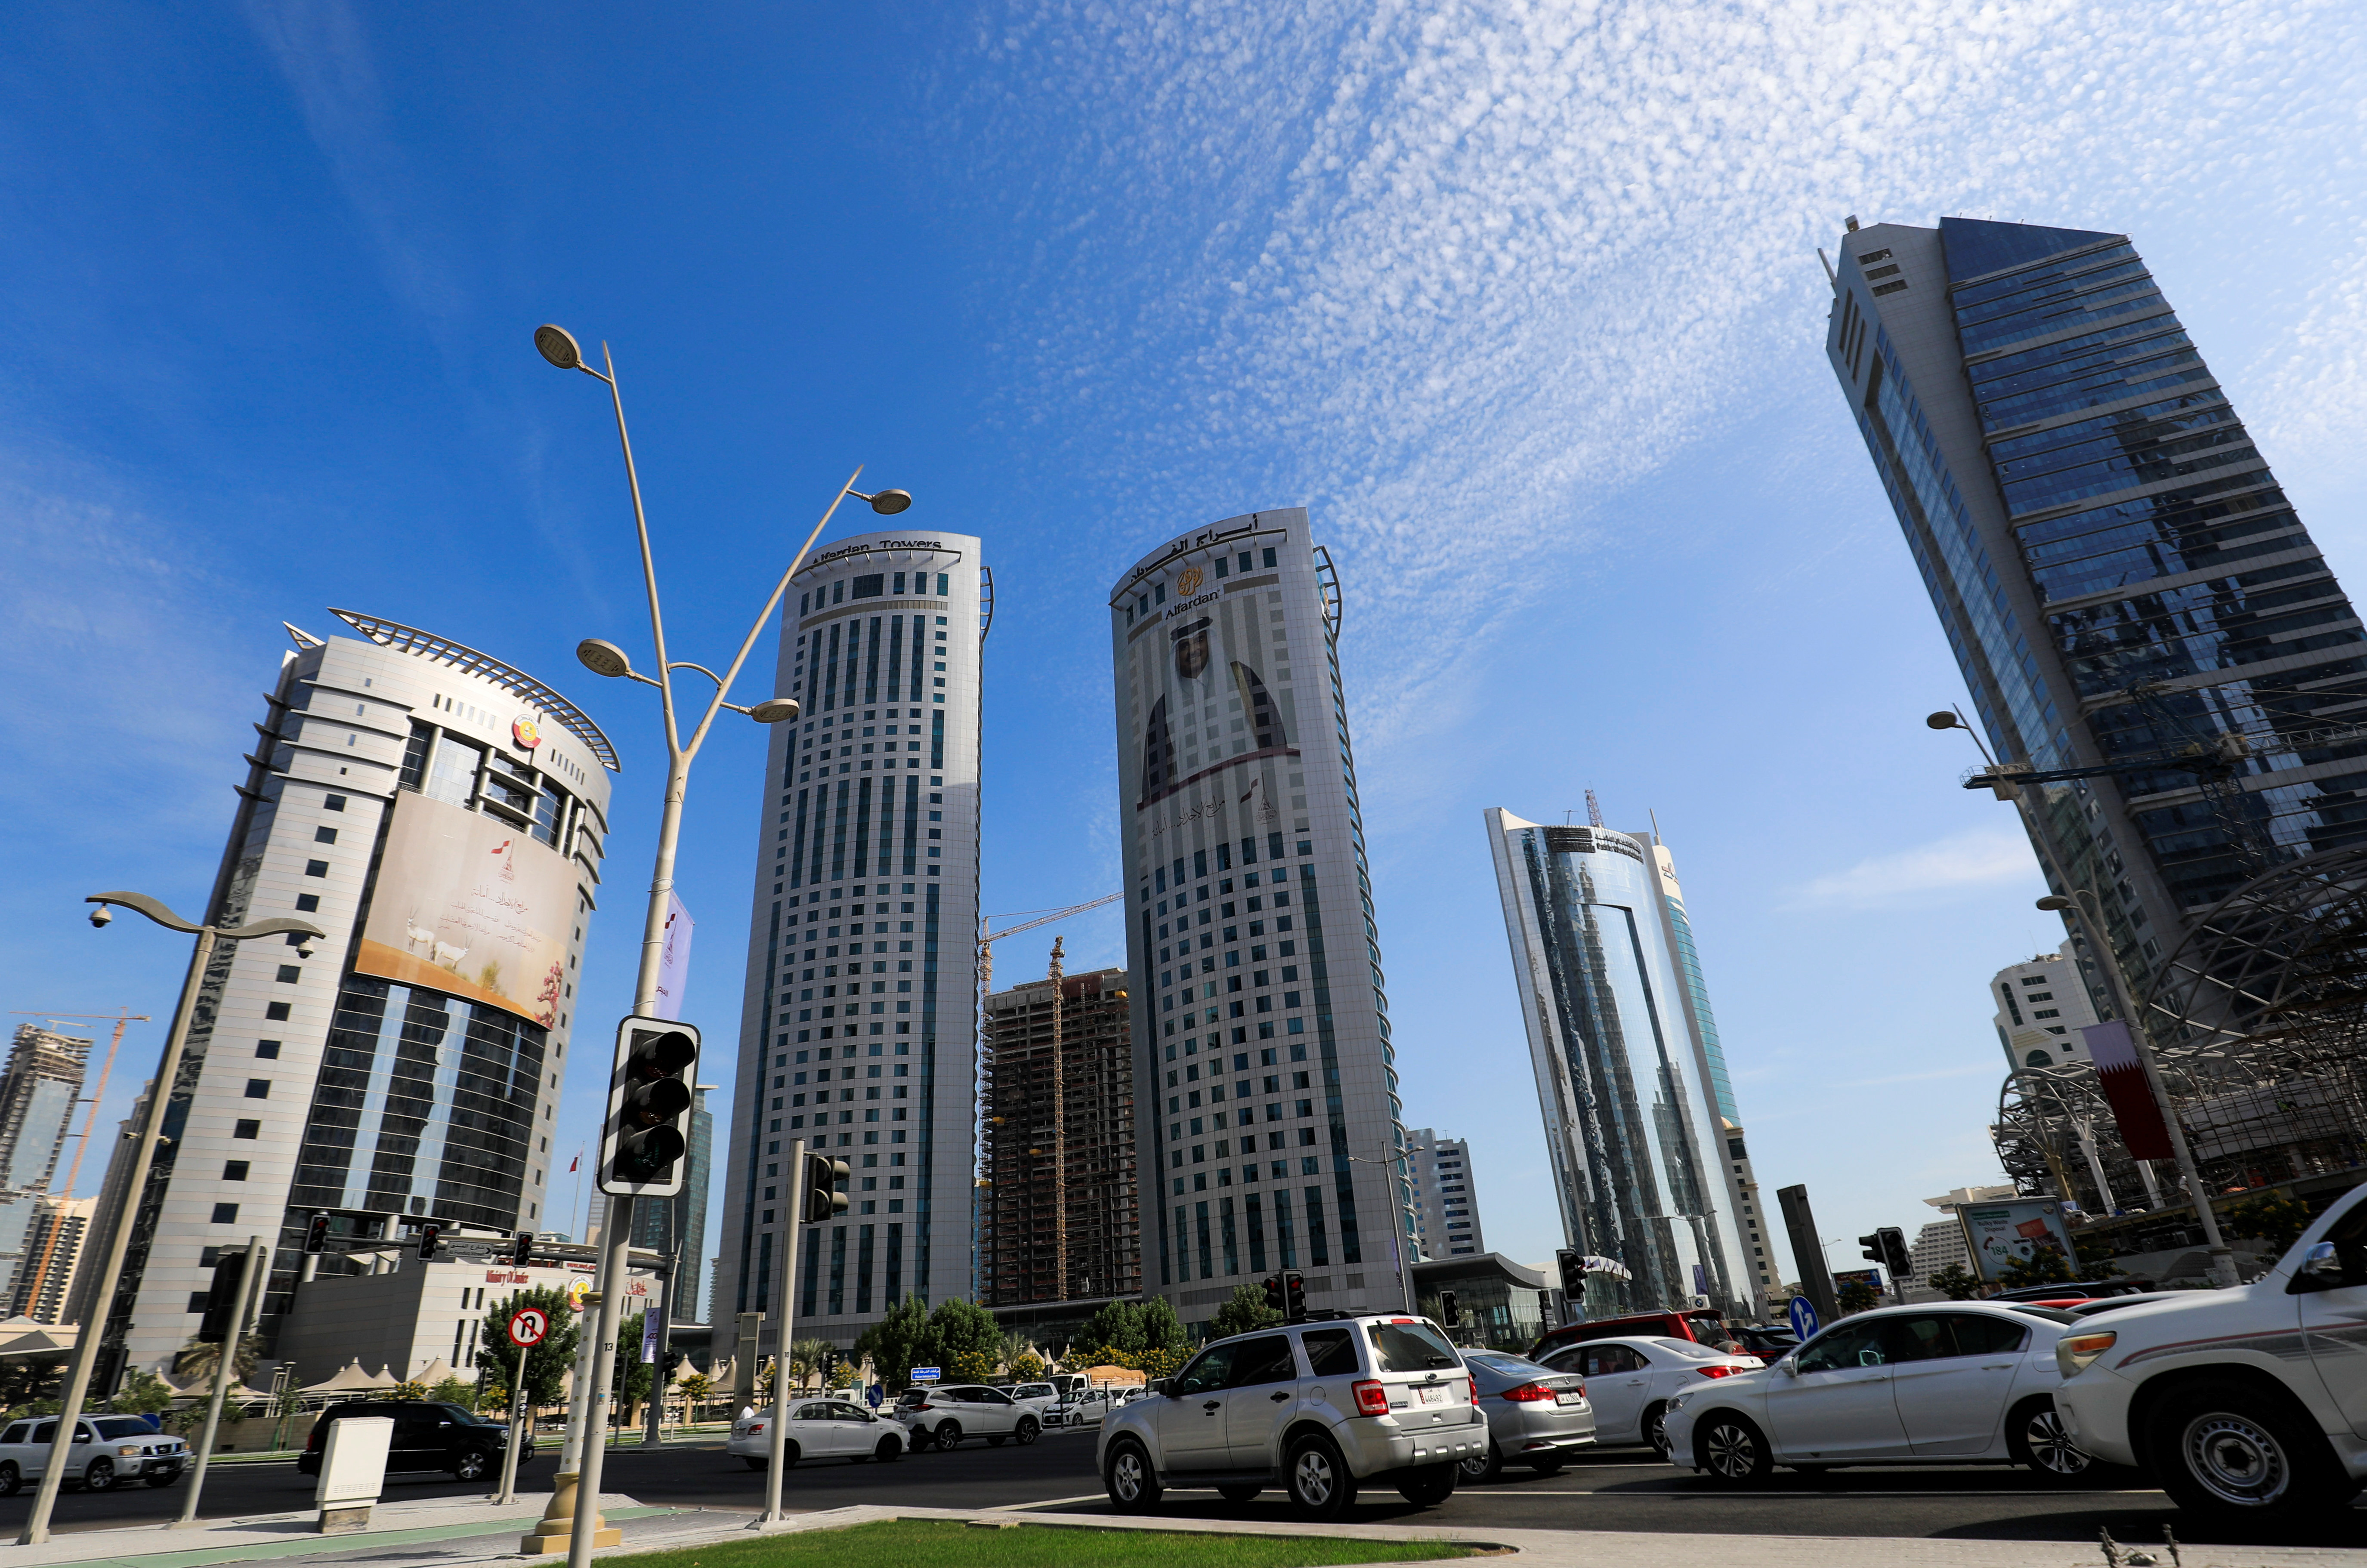 Vehicles are seen in a traffic jam in front of government buildings next to skyscrapers in Doha